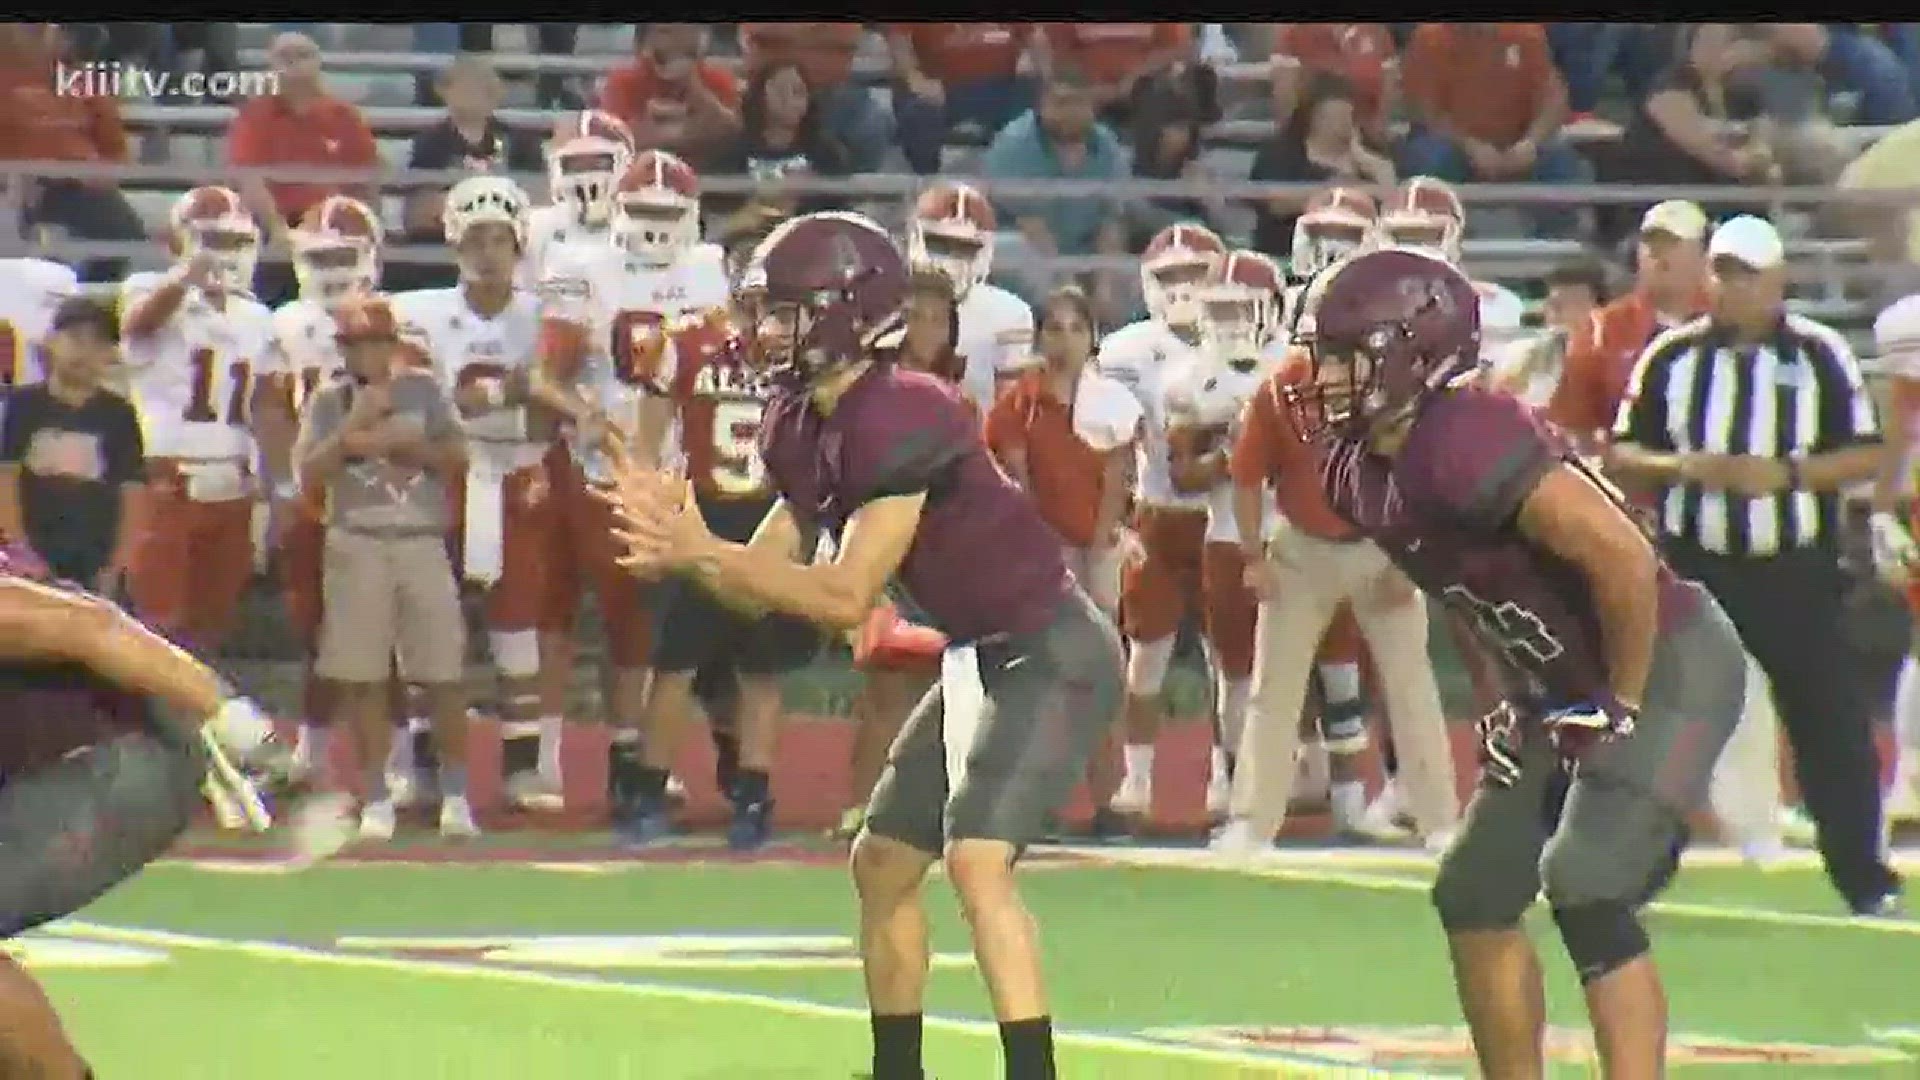 The Flour Bluff Hornets like their chances against No. 5 Angleton Wildcats.